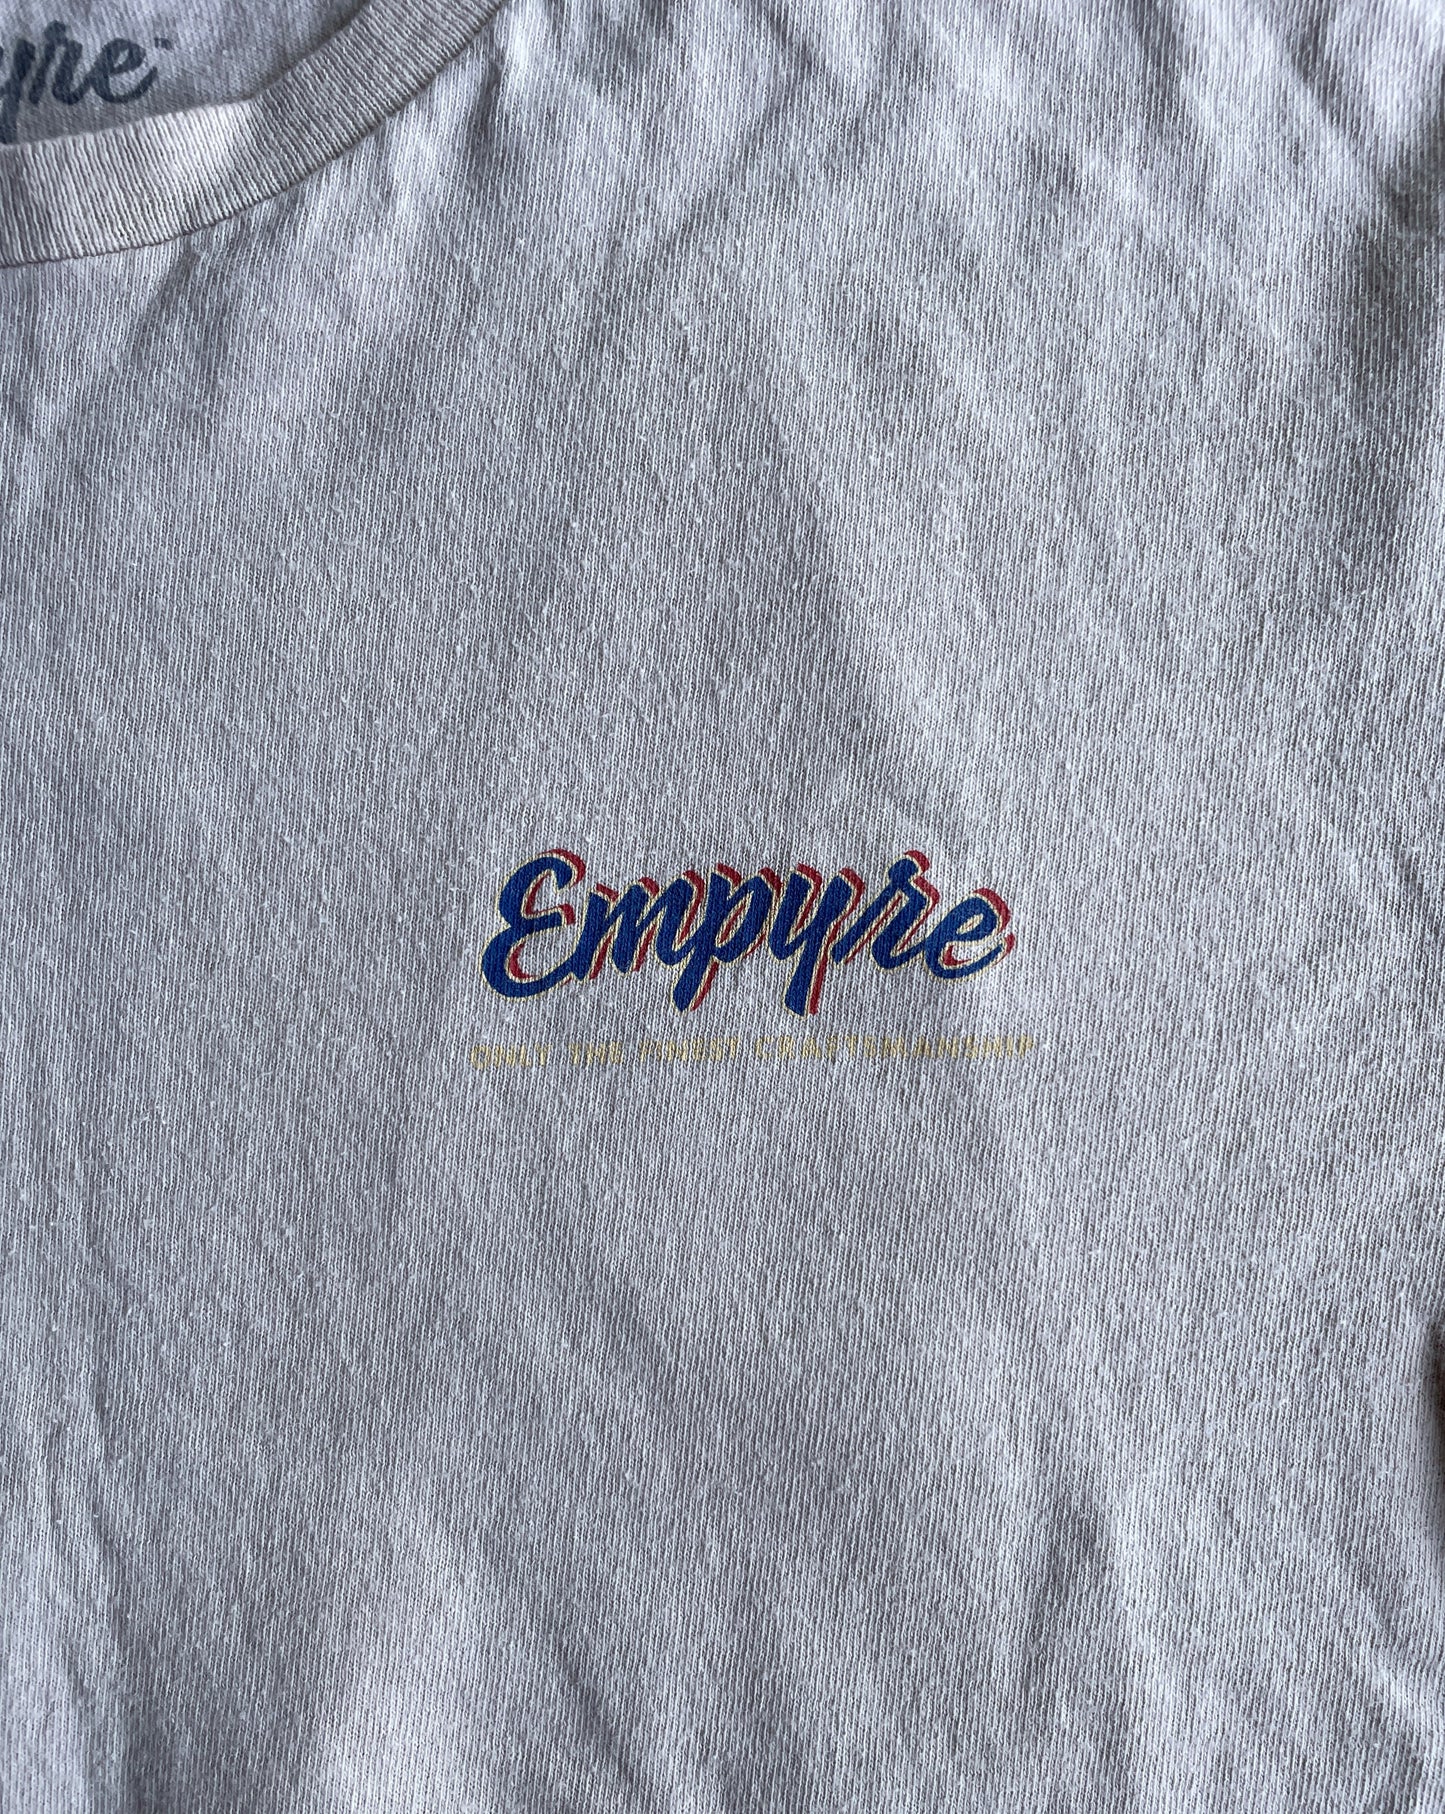 EMPYRE CLOTHING